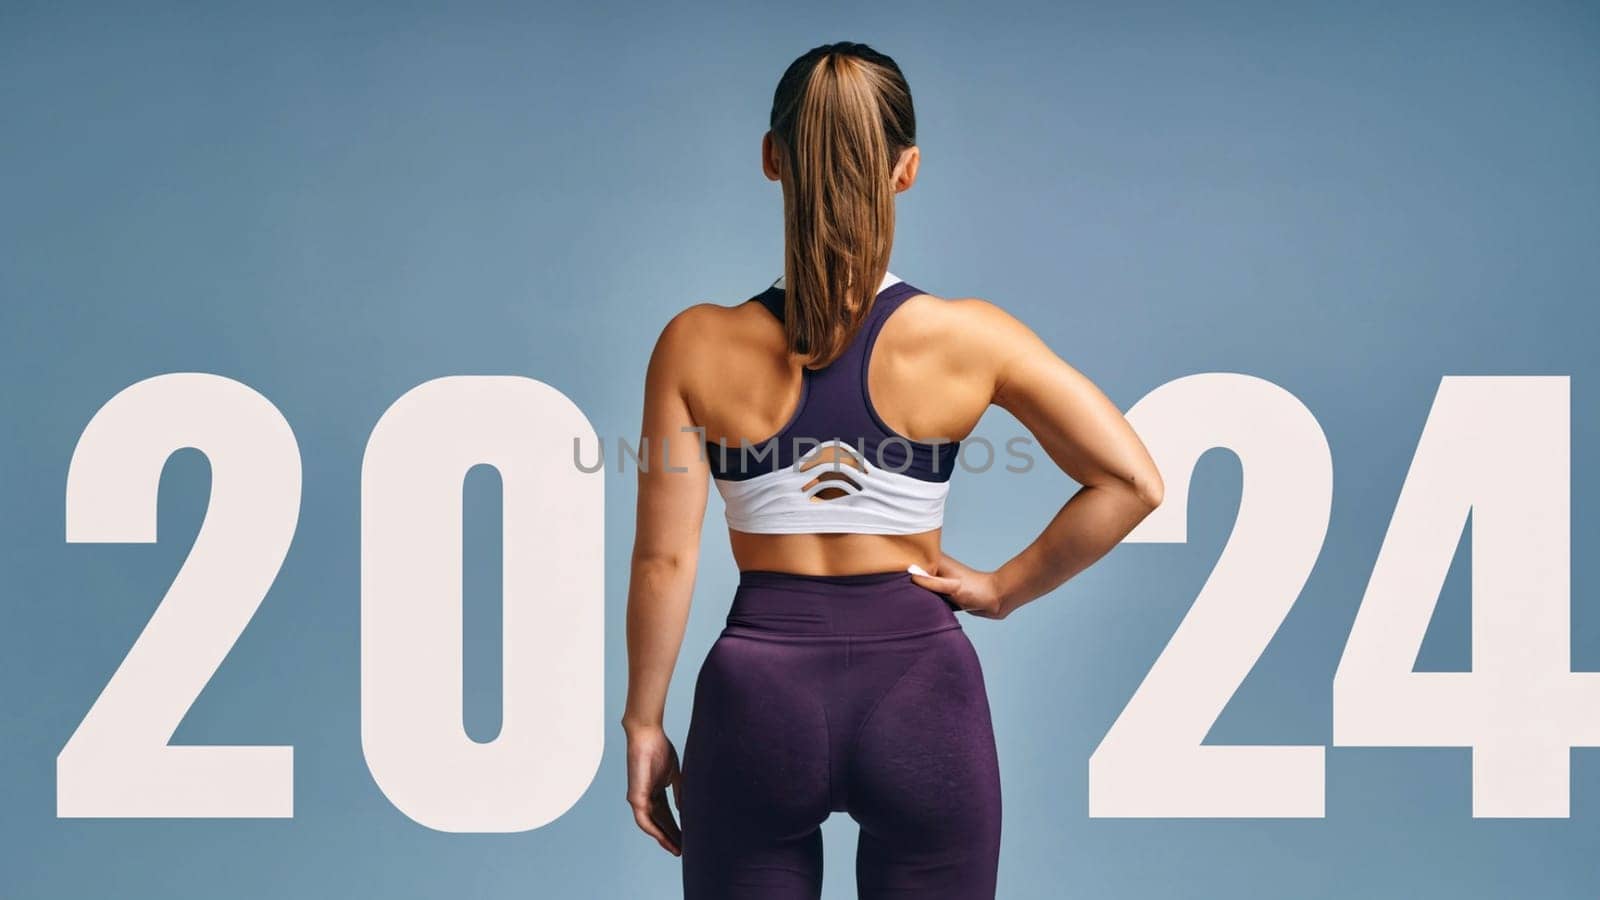 sport girl with the new year 2024 . sportwoman look at 2024 white color letter over blue background, Sport happy new year 2024 cover concept. High quality image